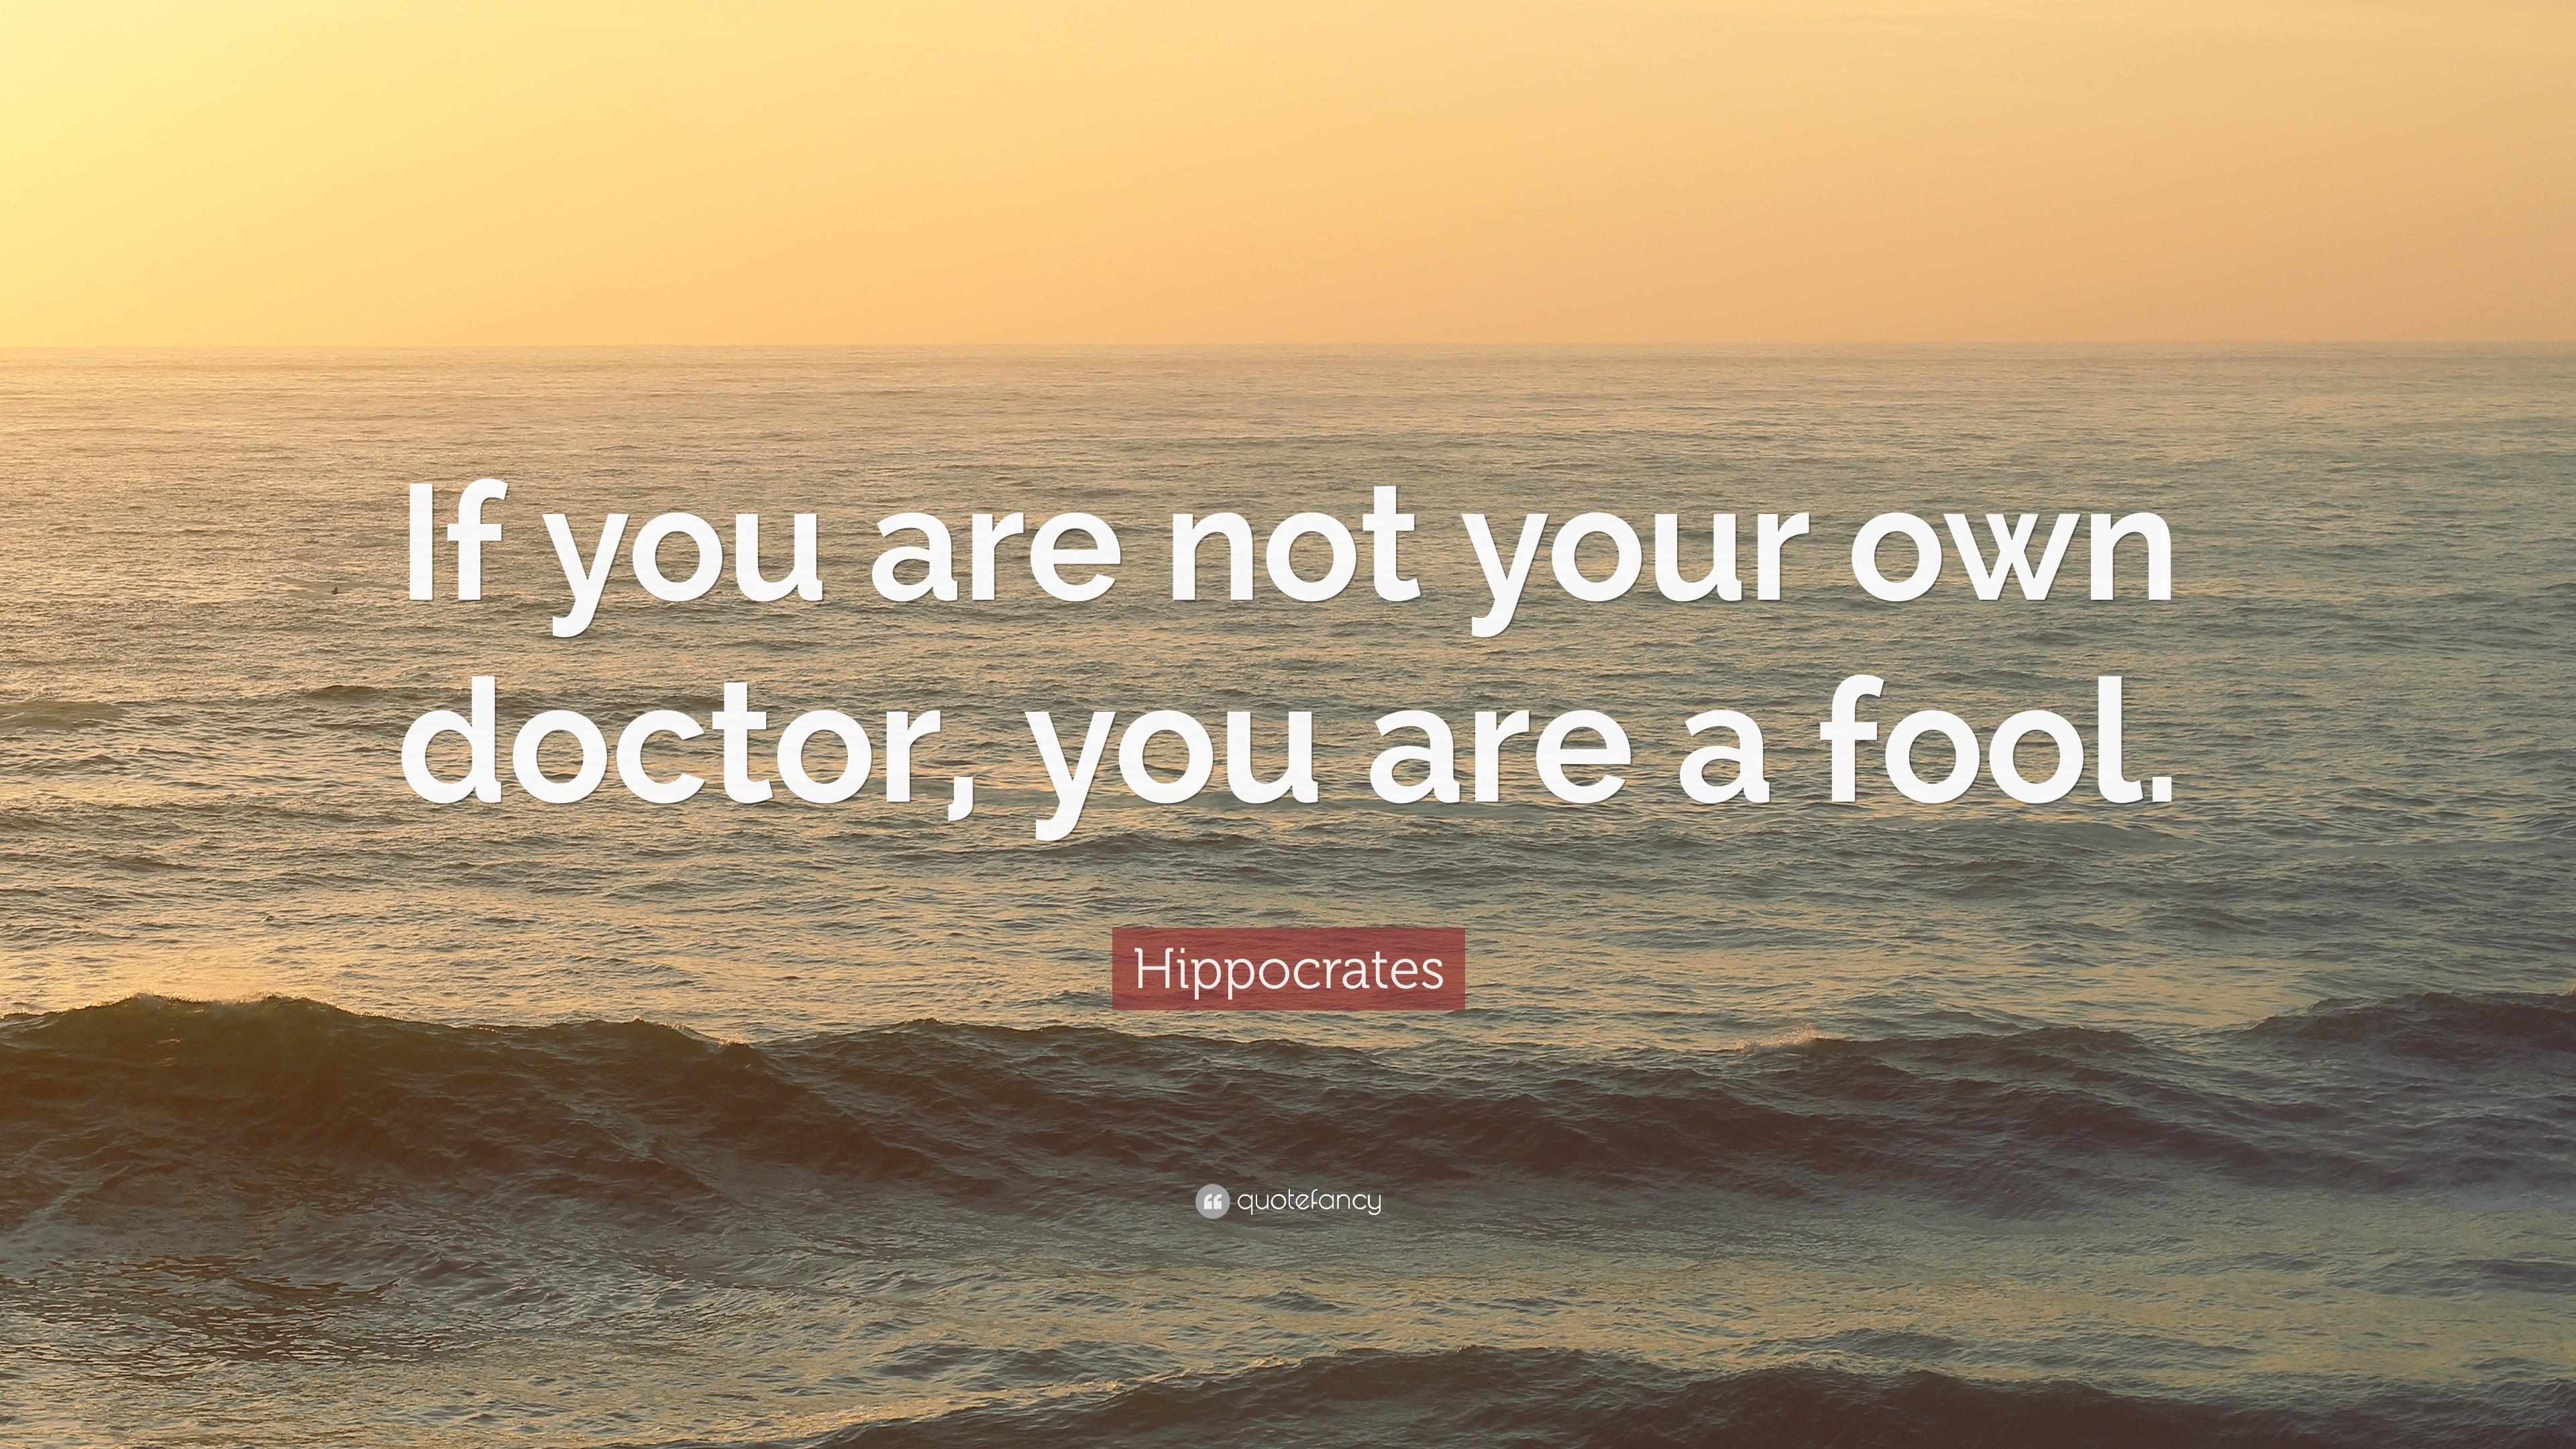 Hippocrates Quote: “If you are not your own doctor, you are a fool